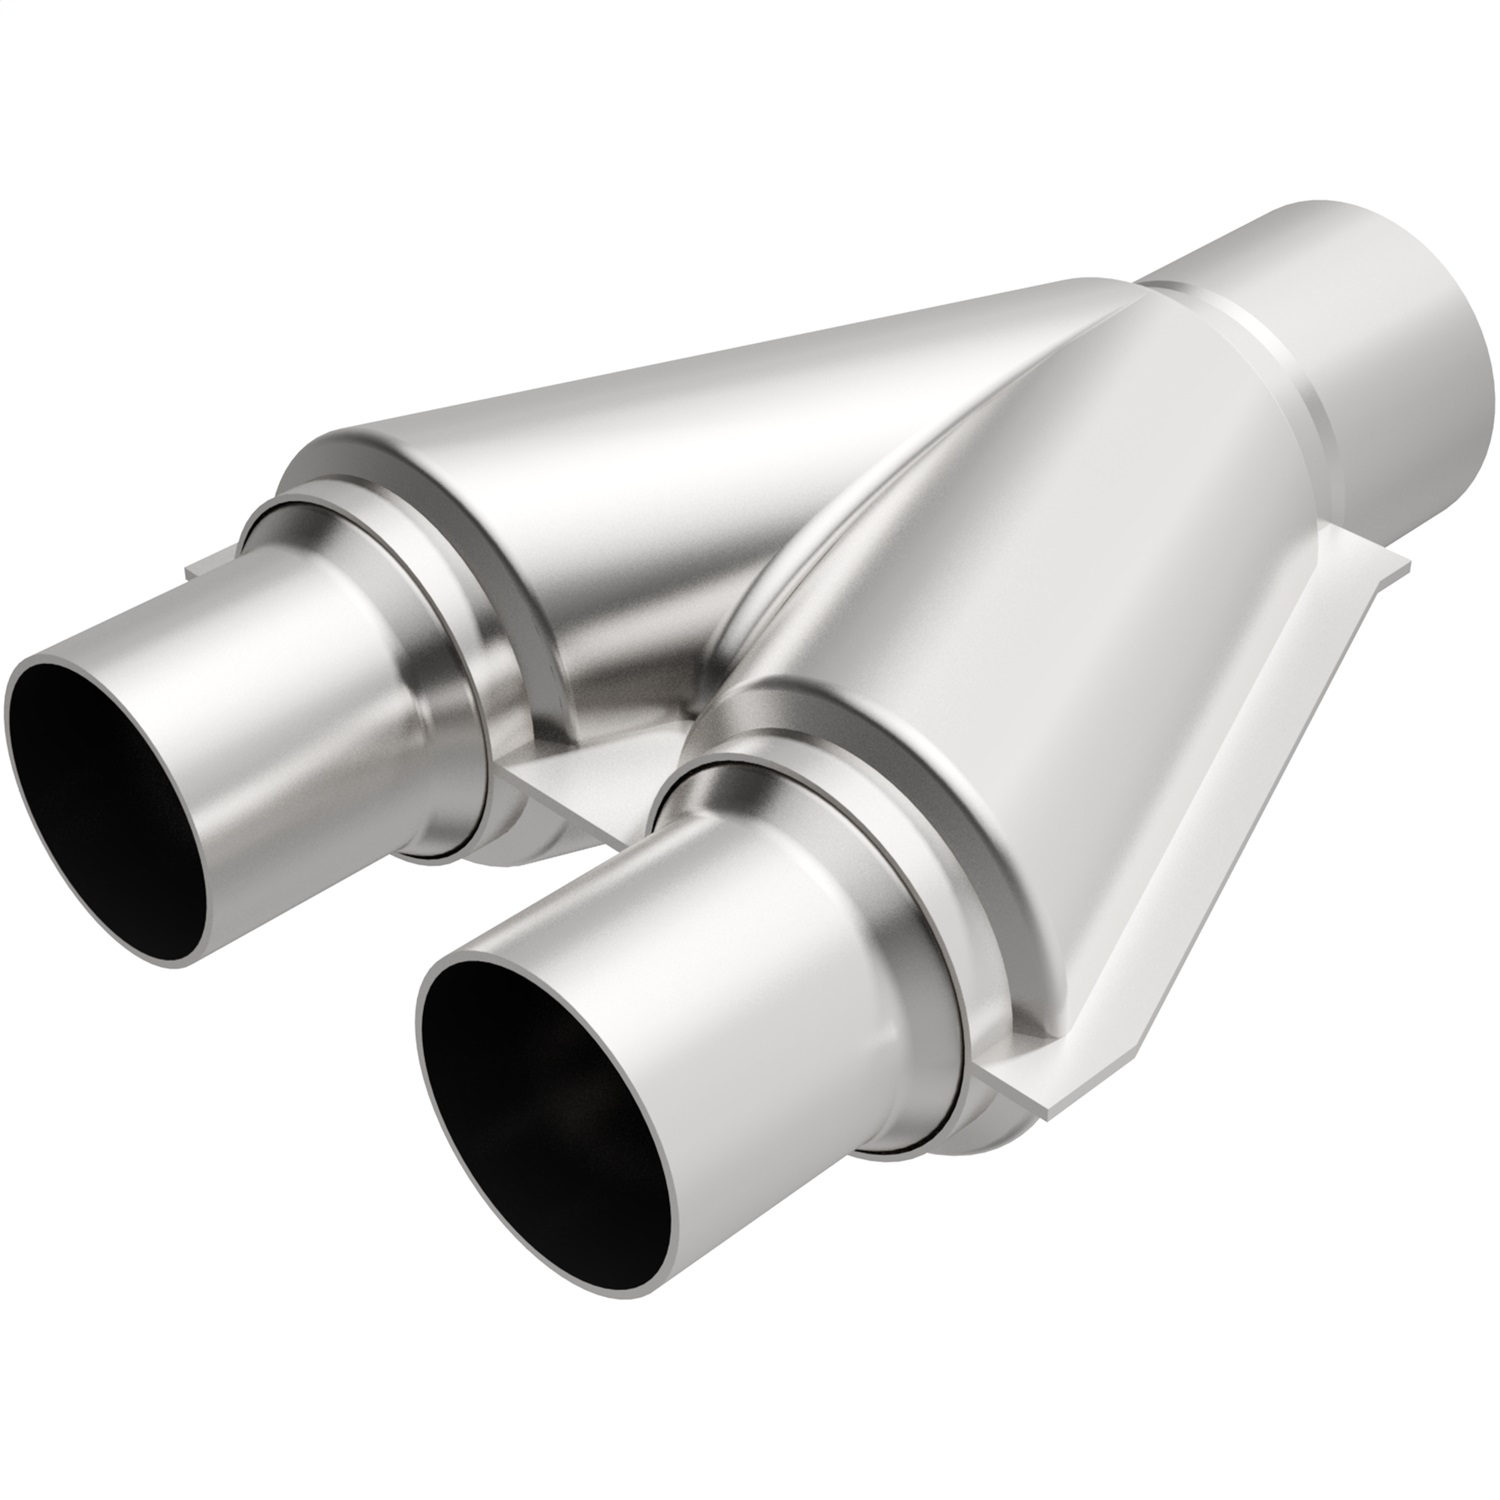 Magnaflow Performance Exhaust Magnaflow Performance Exhaust 10748 Stainless Steel Y-Pipe